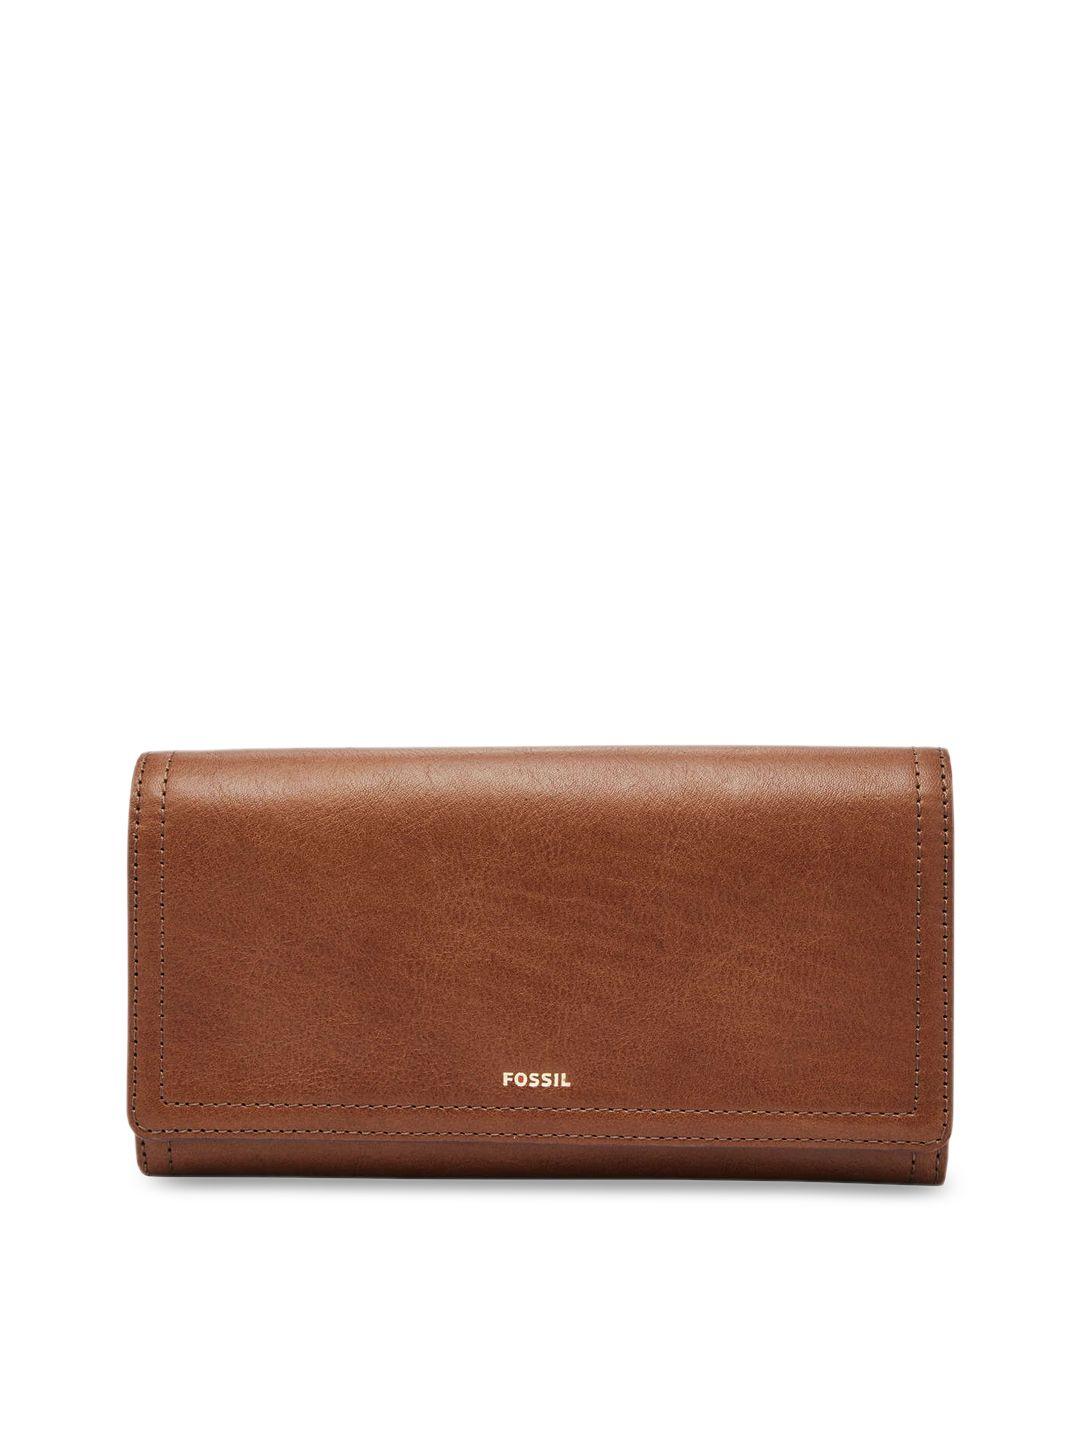 fossil brown solid leather clutch